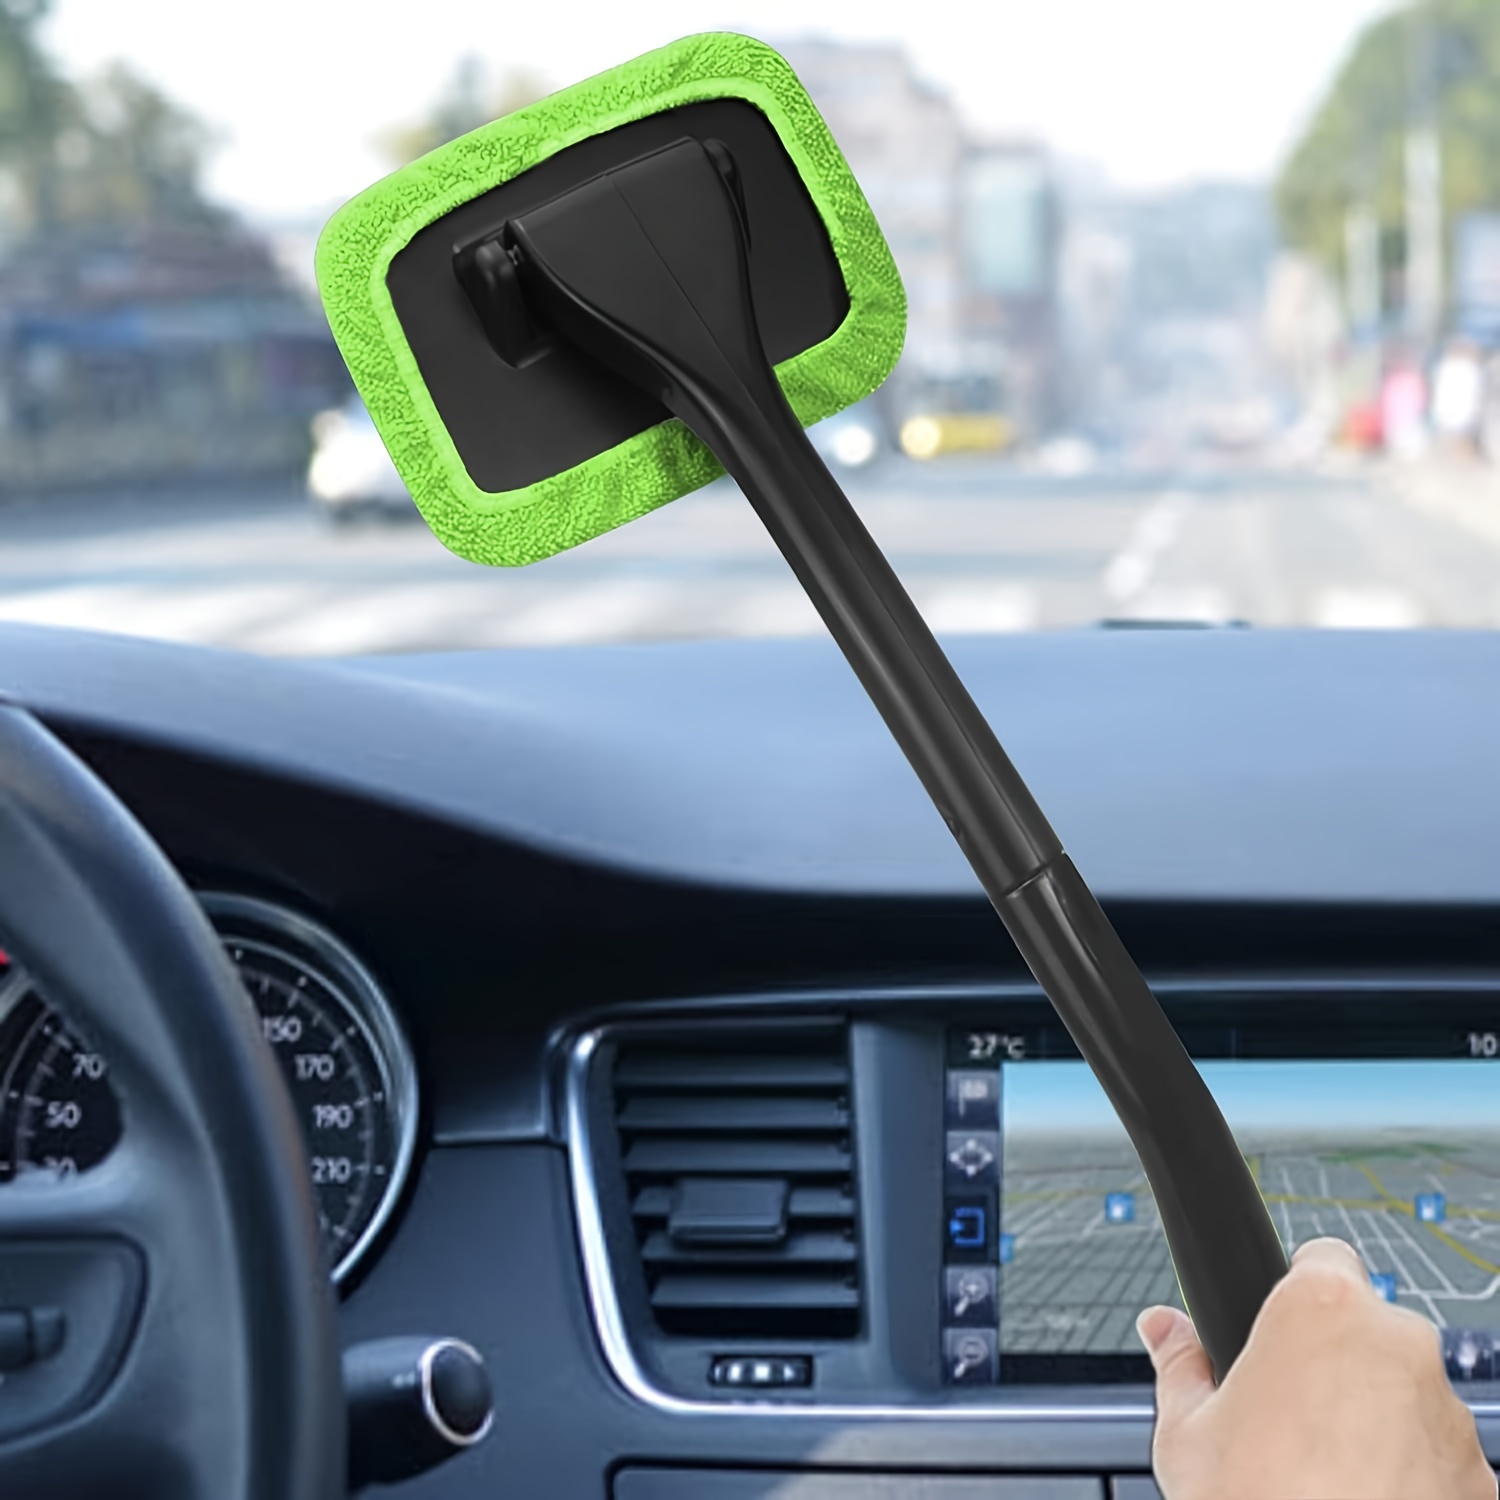 New Car Window Cleaner Brush Kit Windshield Cleaning Wash Tool Inside  Interior Auto Glass Wiper With Long Handle Car Accessories From Otolampara,  $3.54